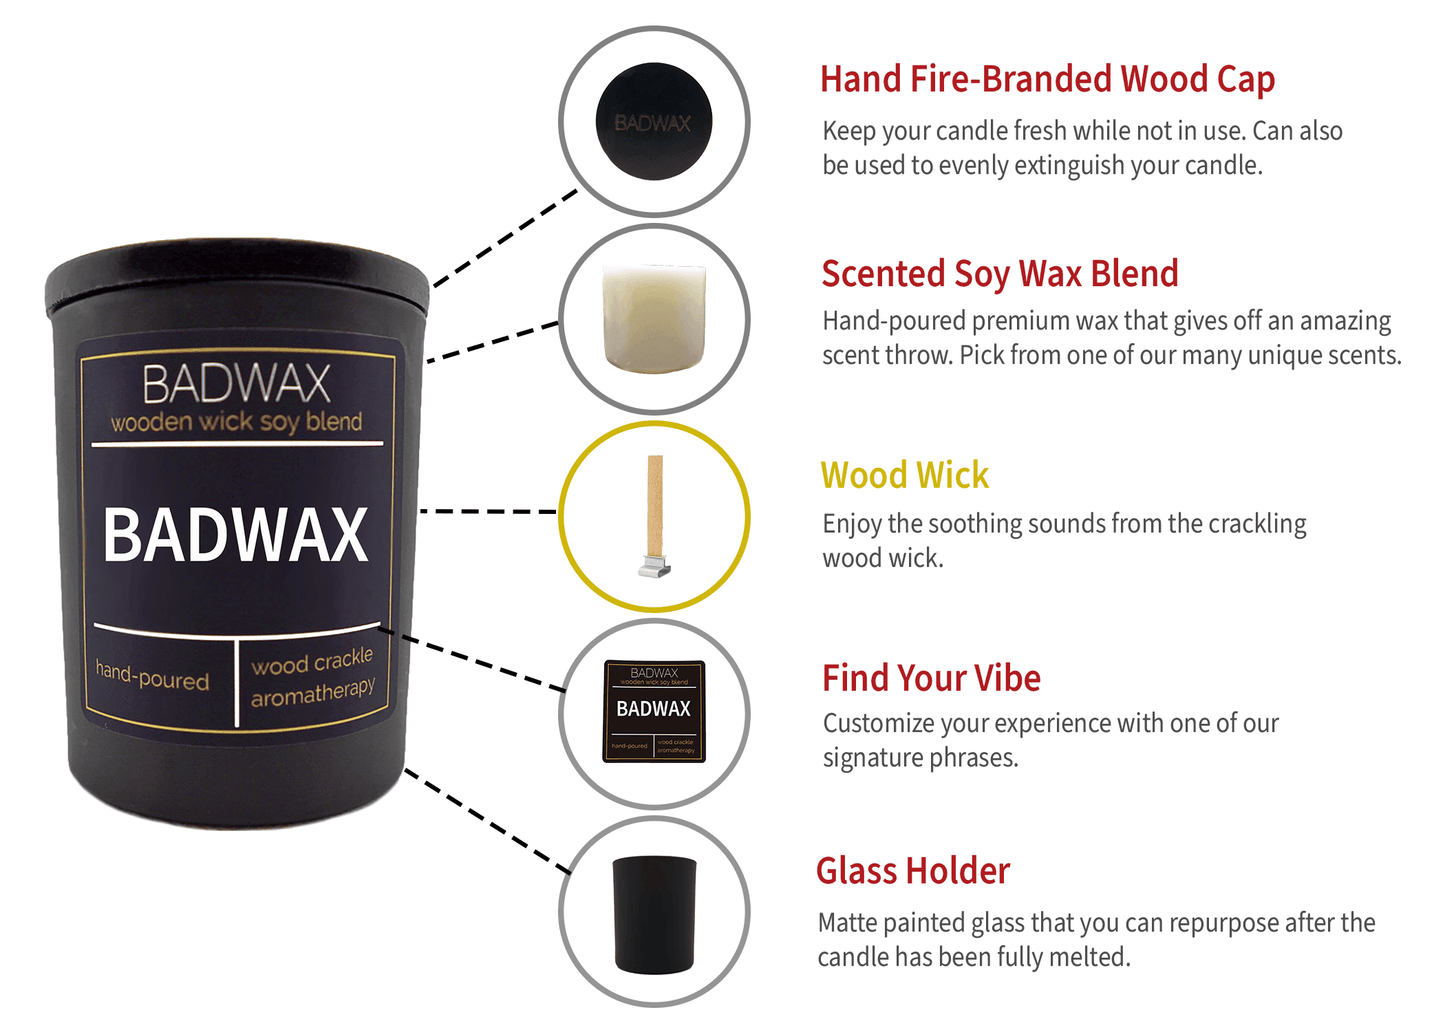 I Luv Yr Dick - Woodwick Candle - BADWAX